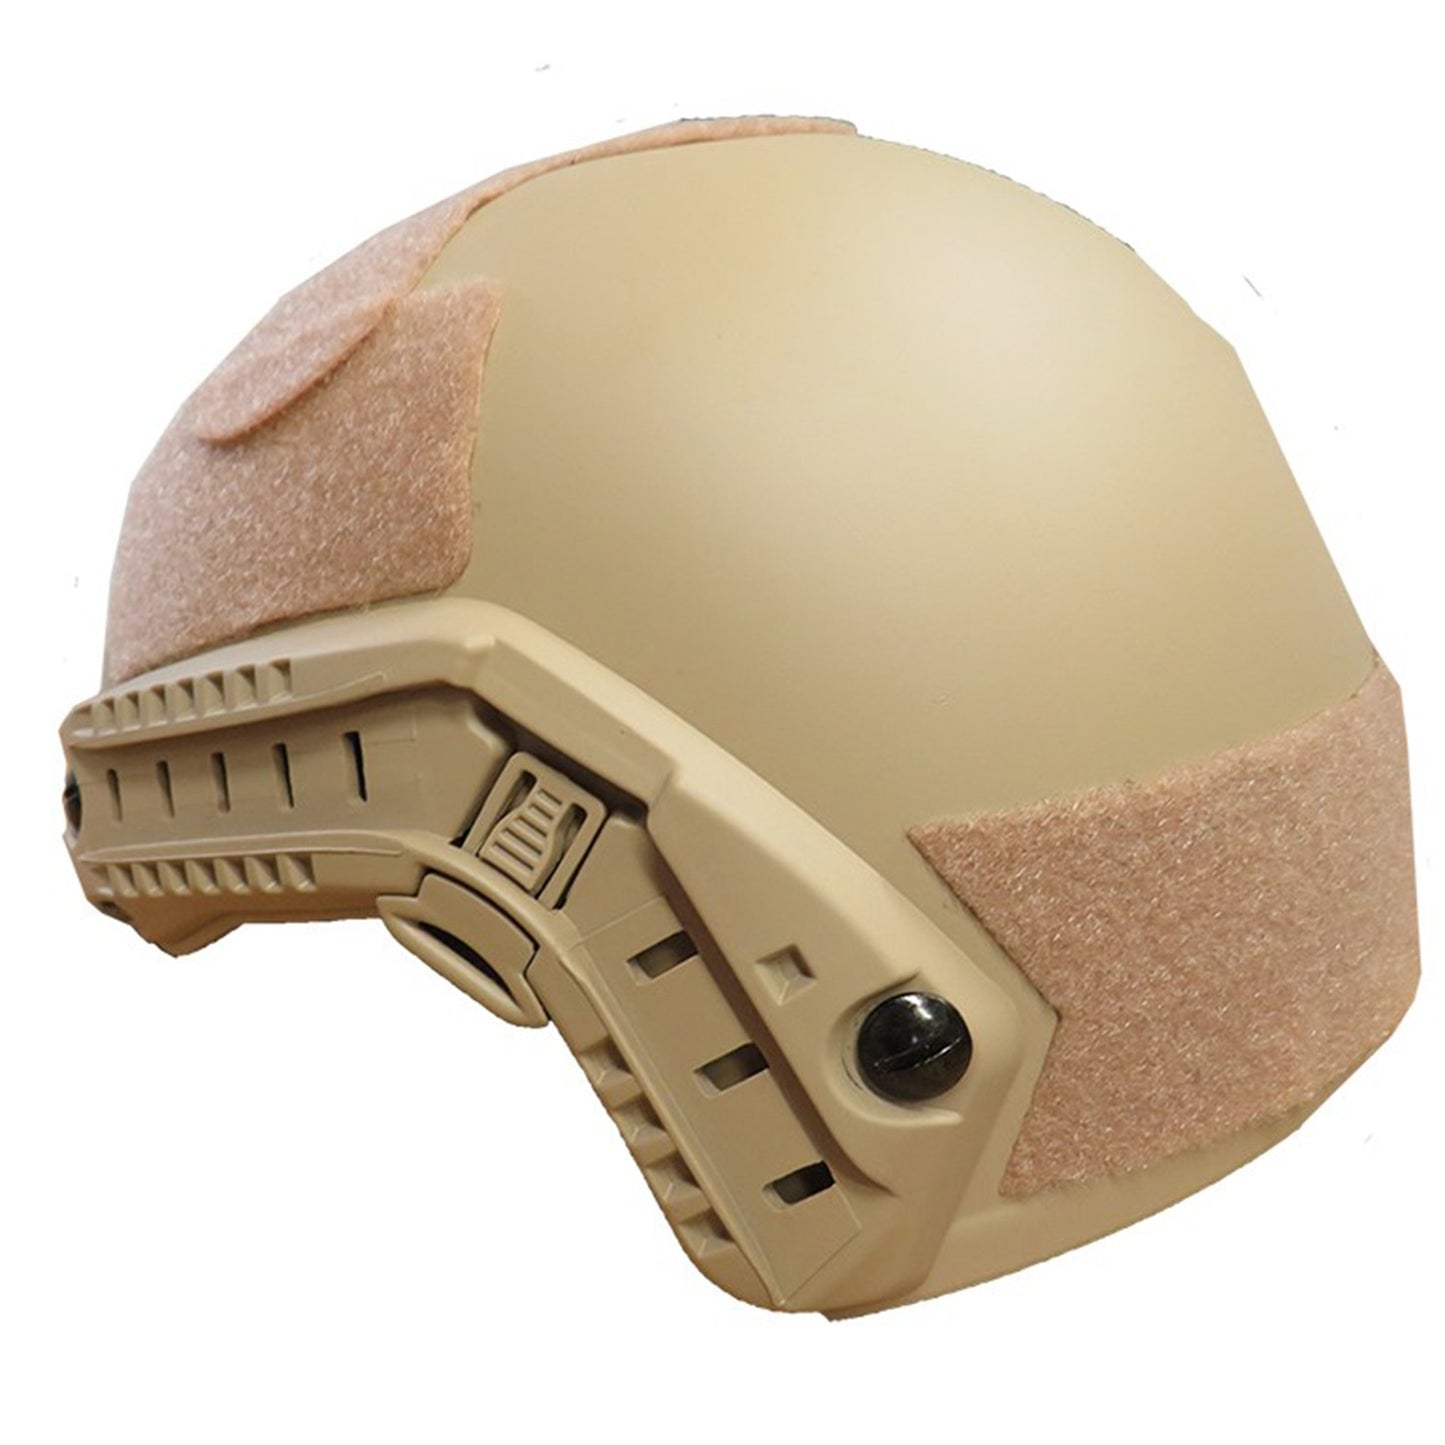 High-grade ABS plastic and foam cushioning team up to create this injection molded Fast Helmet with Velcro for attachments like signs and lights. Experience superior abrasion resistance and balanced weight distribution thanks to the forehead base, designed for NVG equipment. www.defenceqstore.com.au